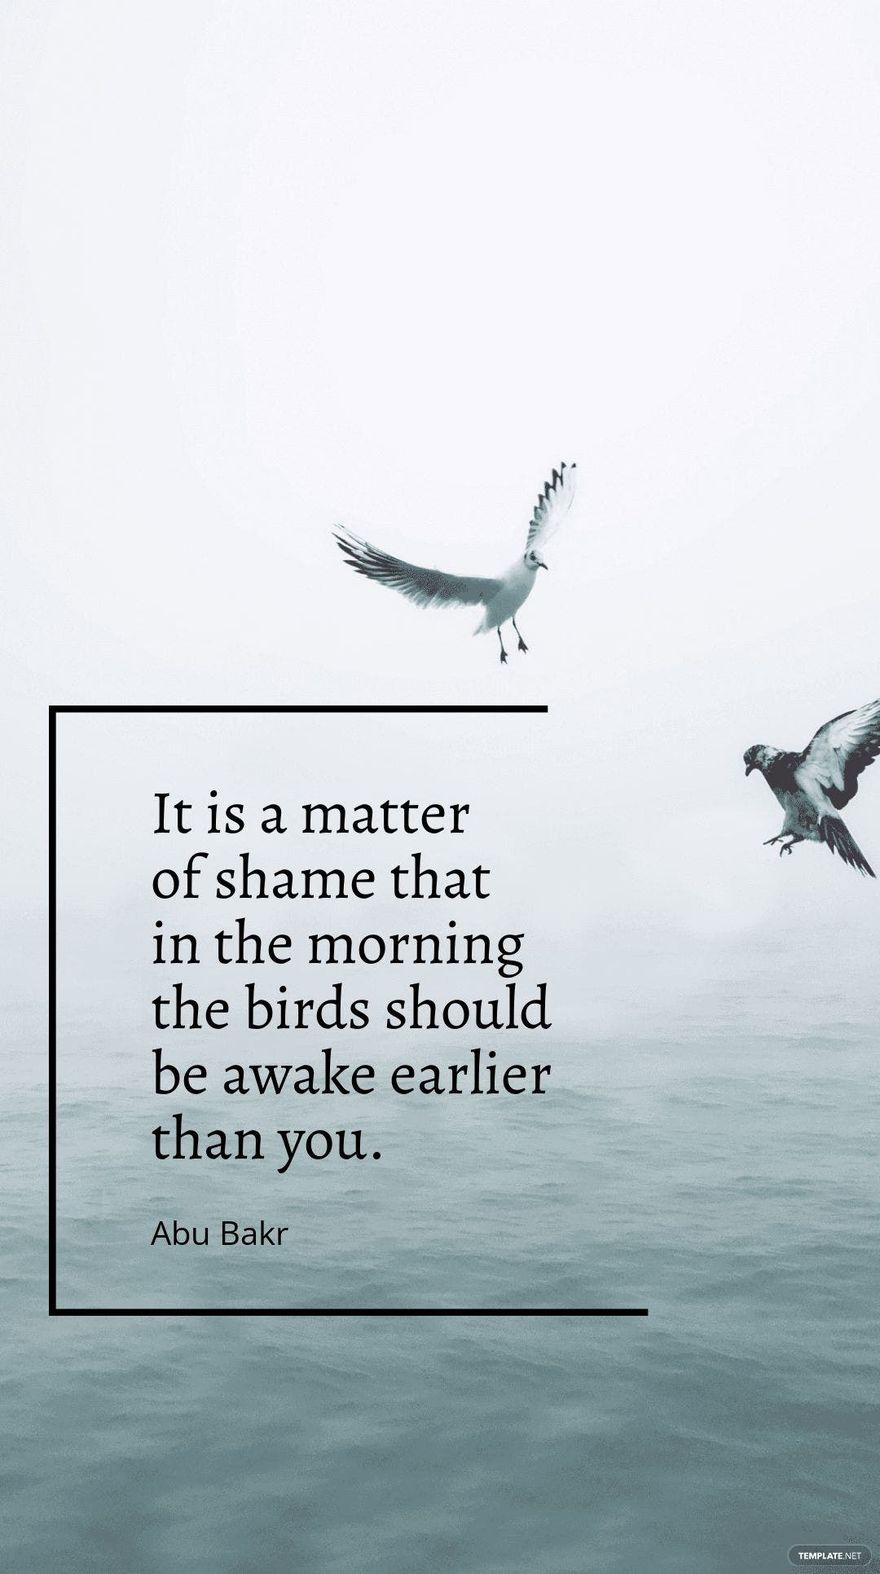 Abu Bakr - It is a matter of shame that in the morning the birds should be awake earlier than you.